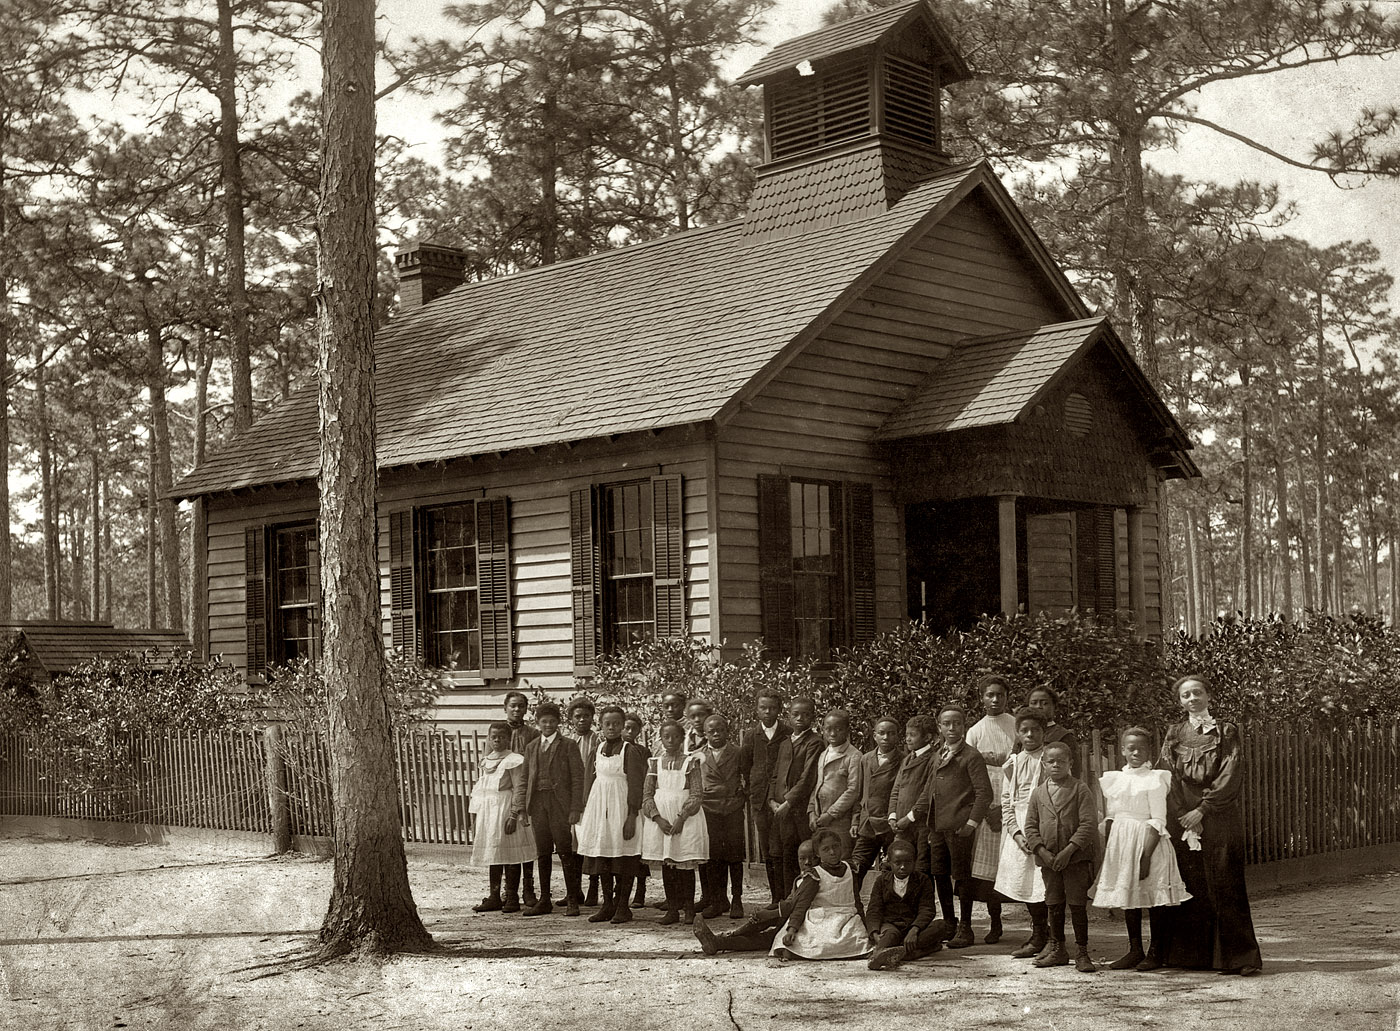 A schoolhouse, schoolmarm and students circa 1905, "possibly in South Carolina." View full size. Gelatin silver print by Detroit Publishing.